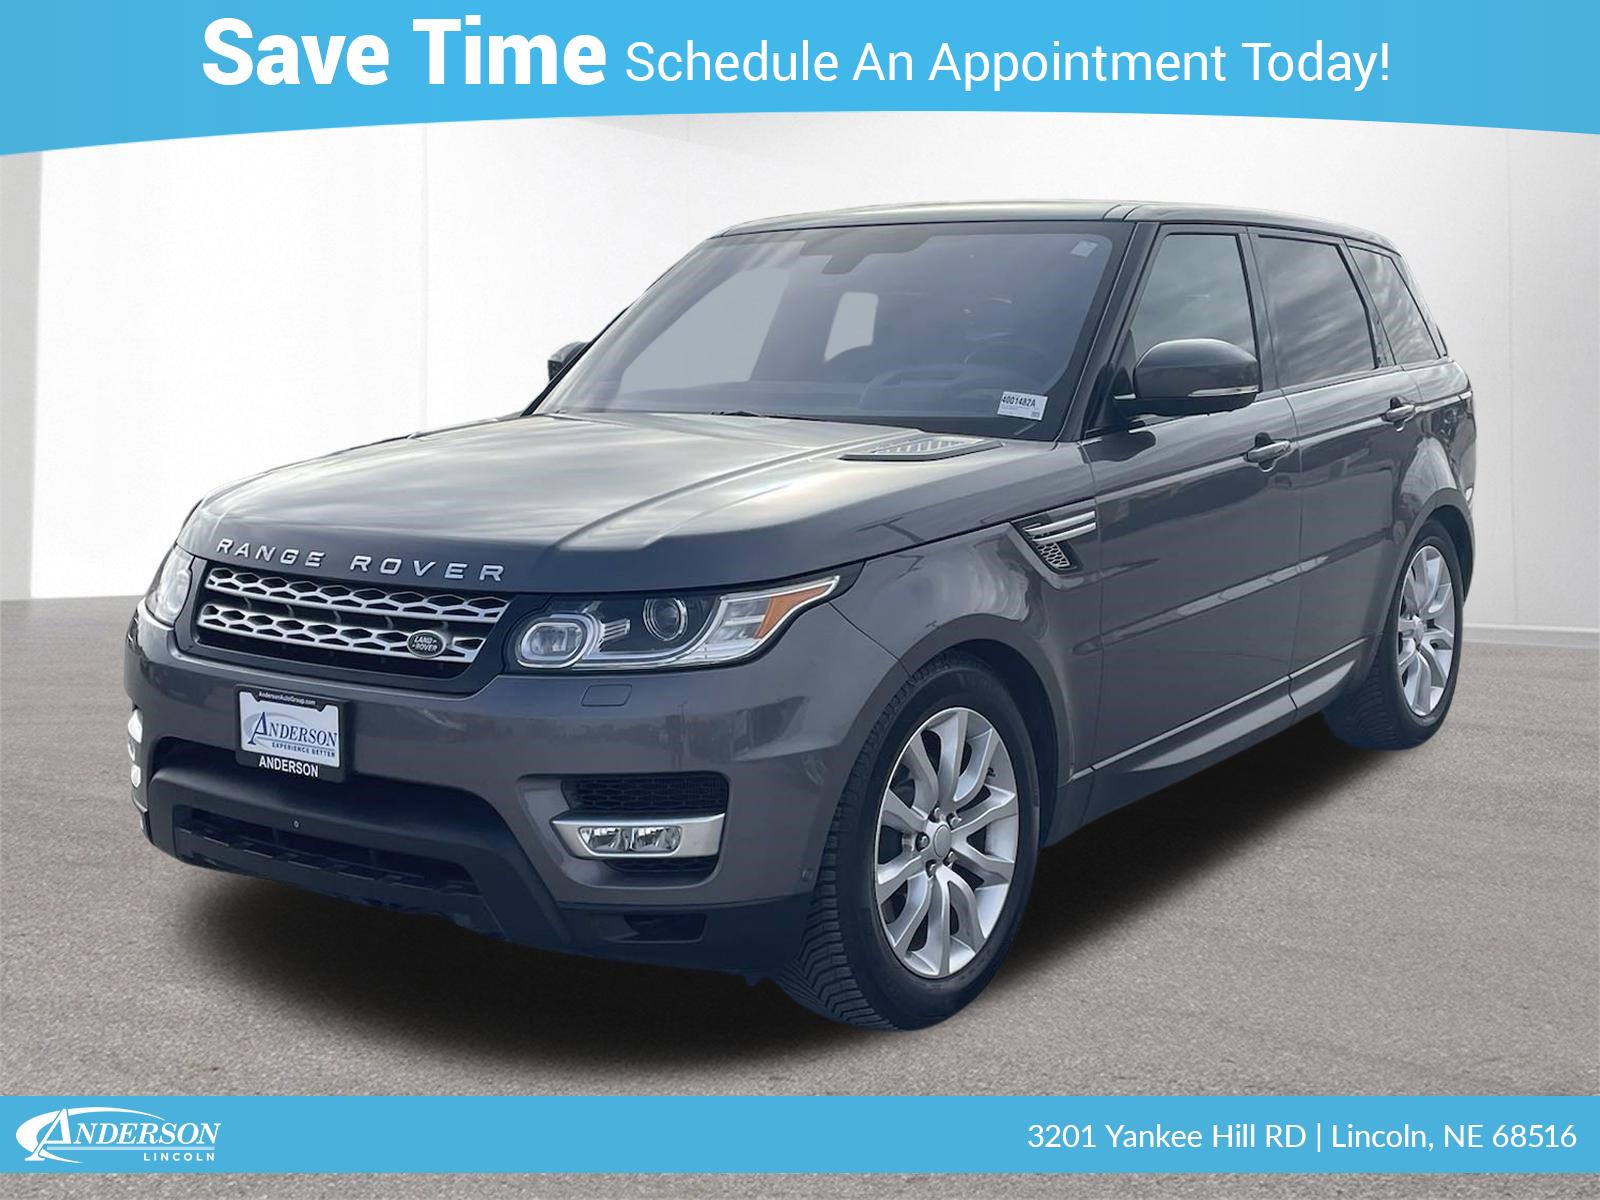 Used 2016 Land Rover Range Rover Sport V6 HSE SUV for sale in Lincoln NE